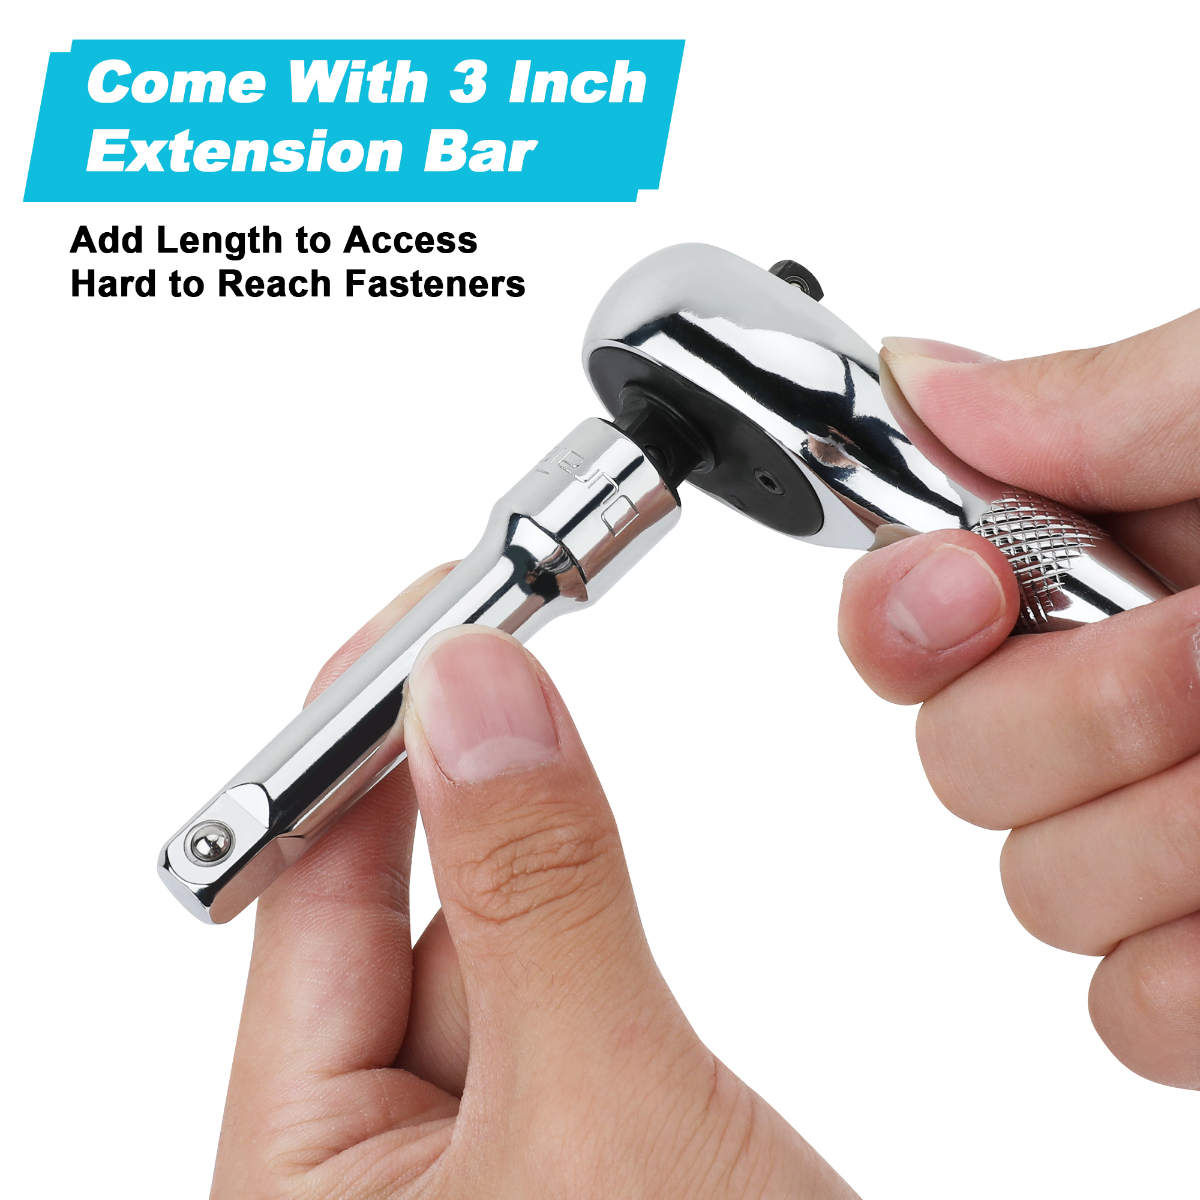 Tite-Reach Extension Wrench 1/2